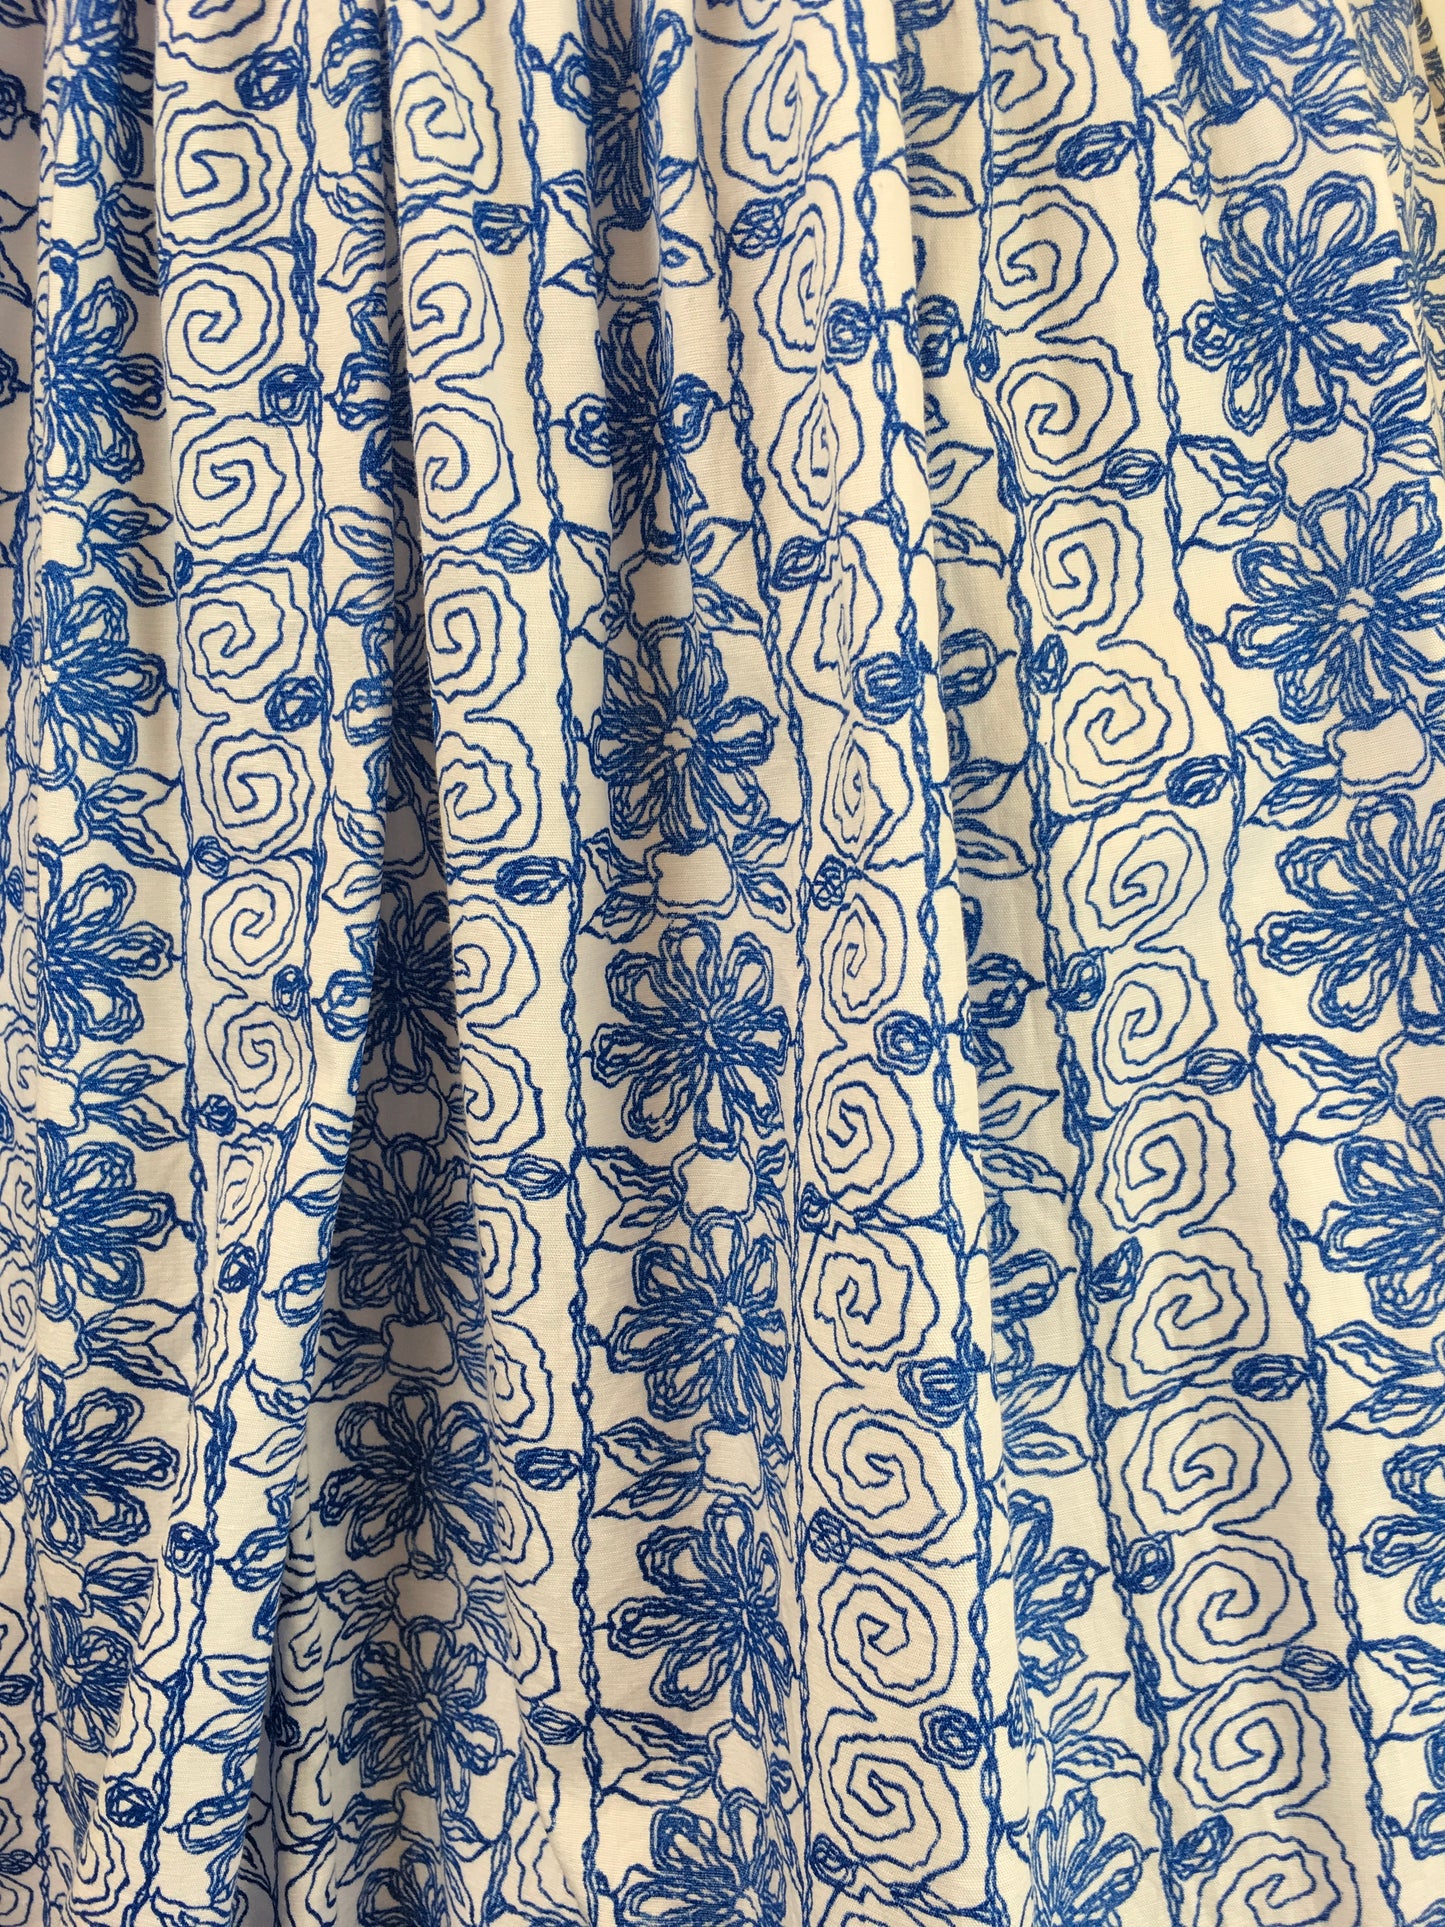 Original 1950s Cotton Day Dress - In a Lovely Cobalt Blue and White Scribble Fabric